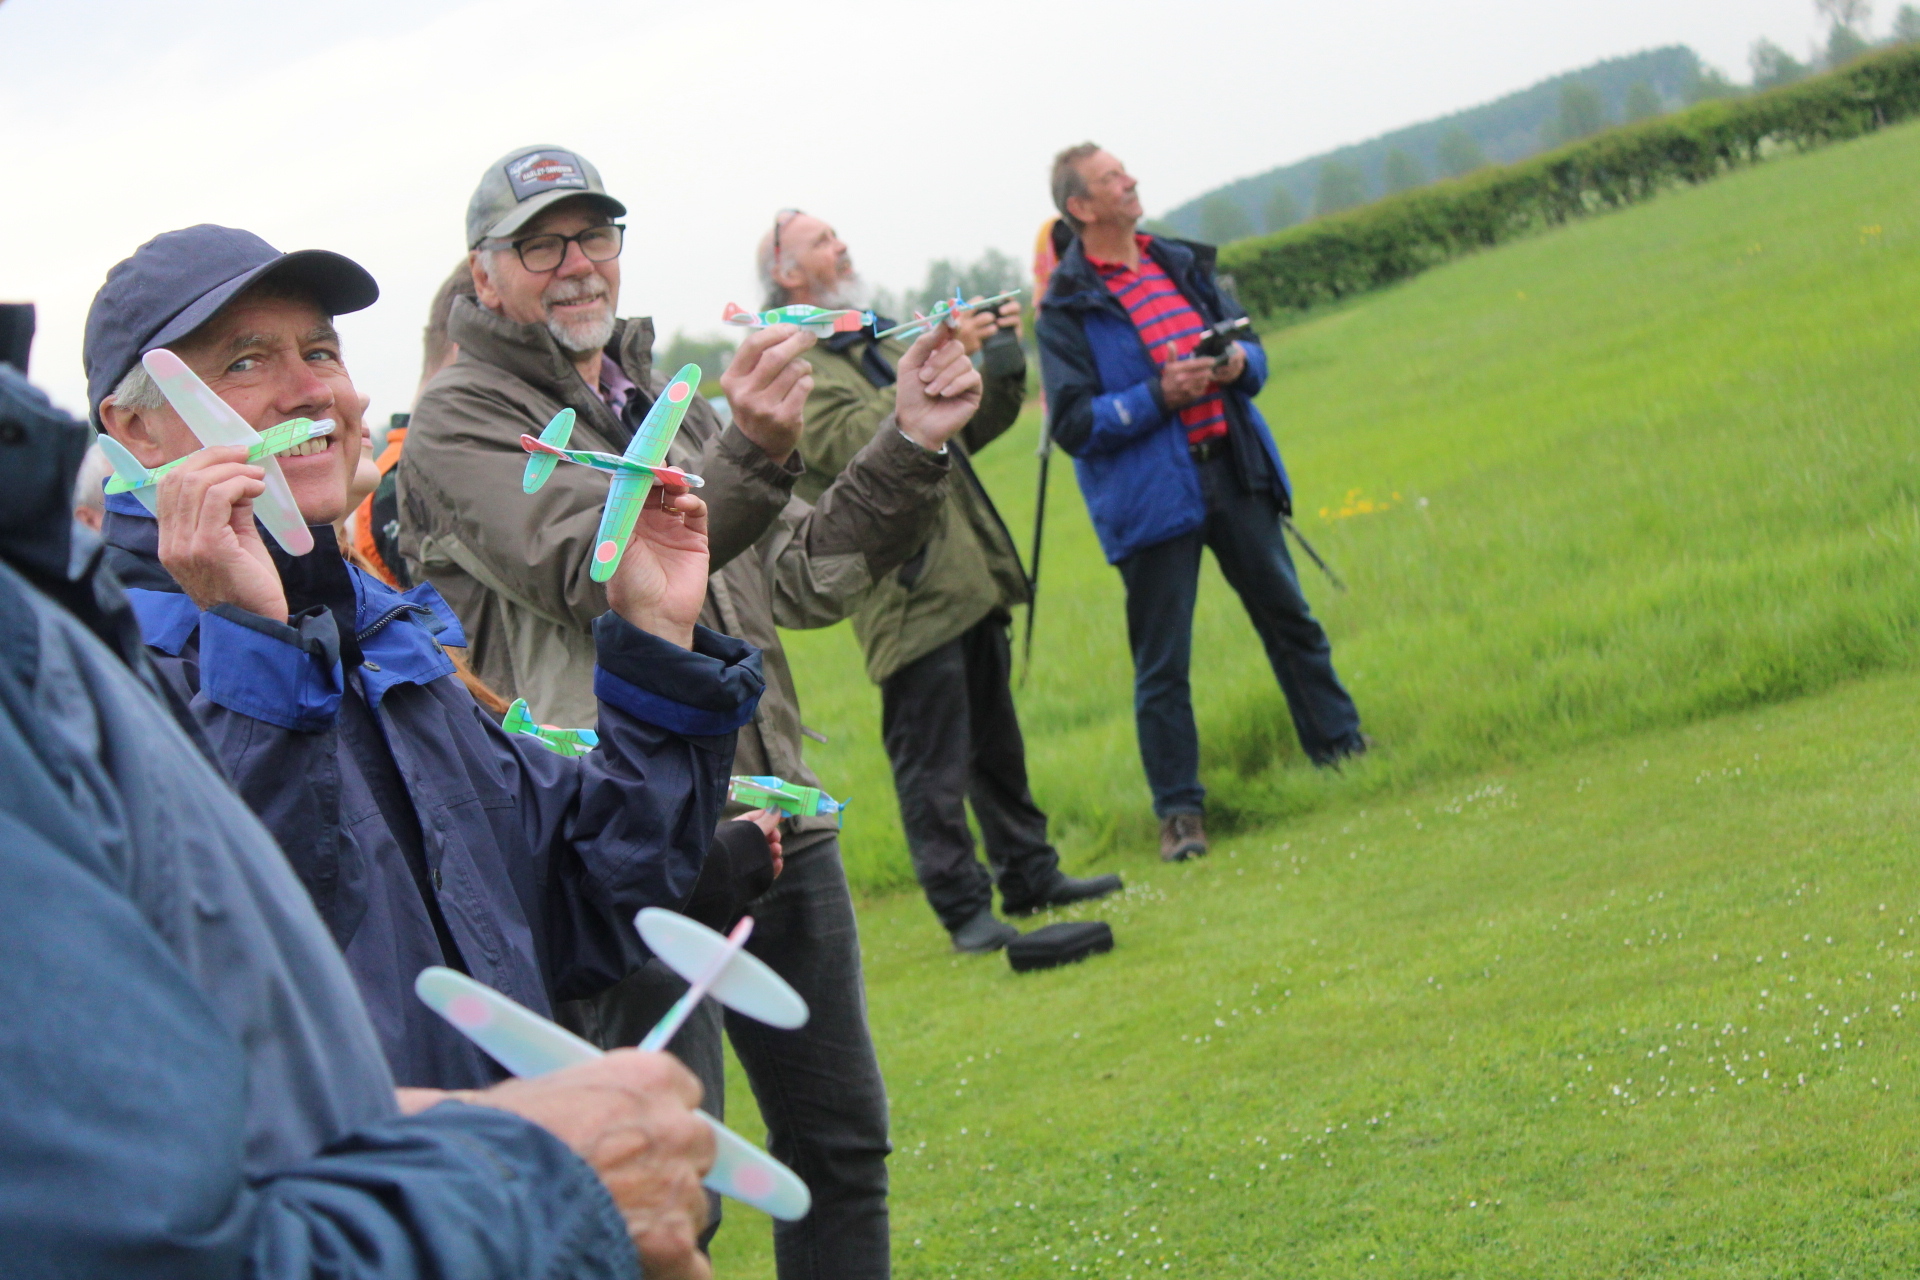 North Berks Radio Model Aircraft Society takes part in the Guinness World Record attempt at their East Hanney airfield on Sunday, May 15 